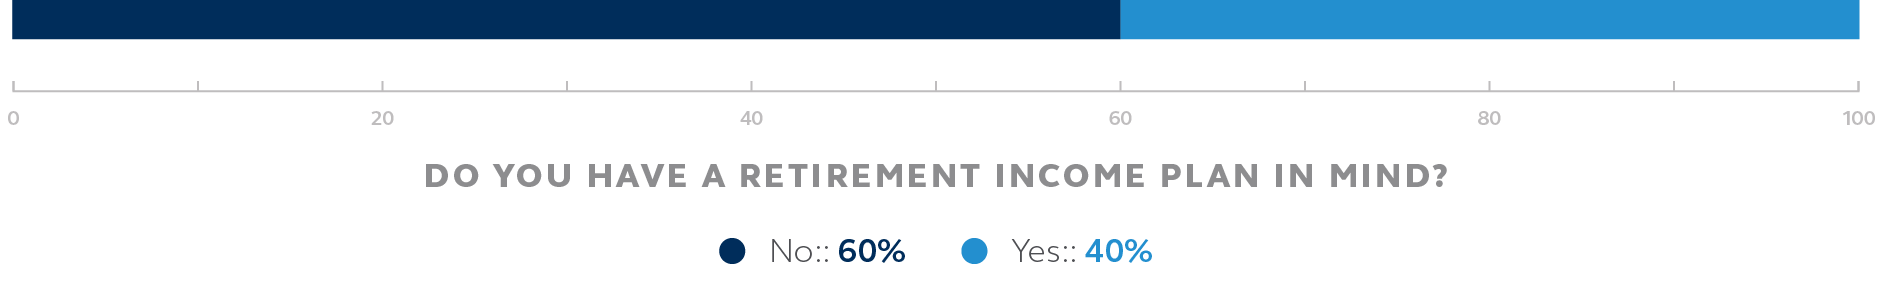 This chart shows that 60% of people do not have a retirement income plan.